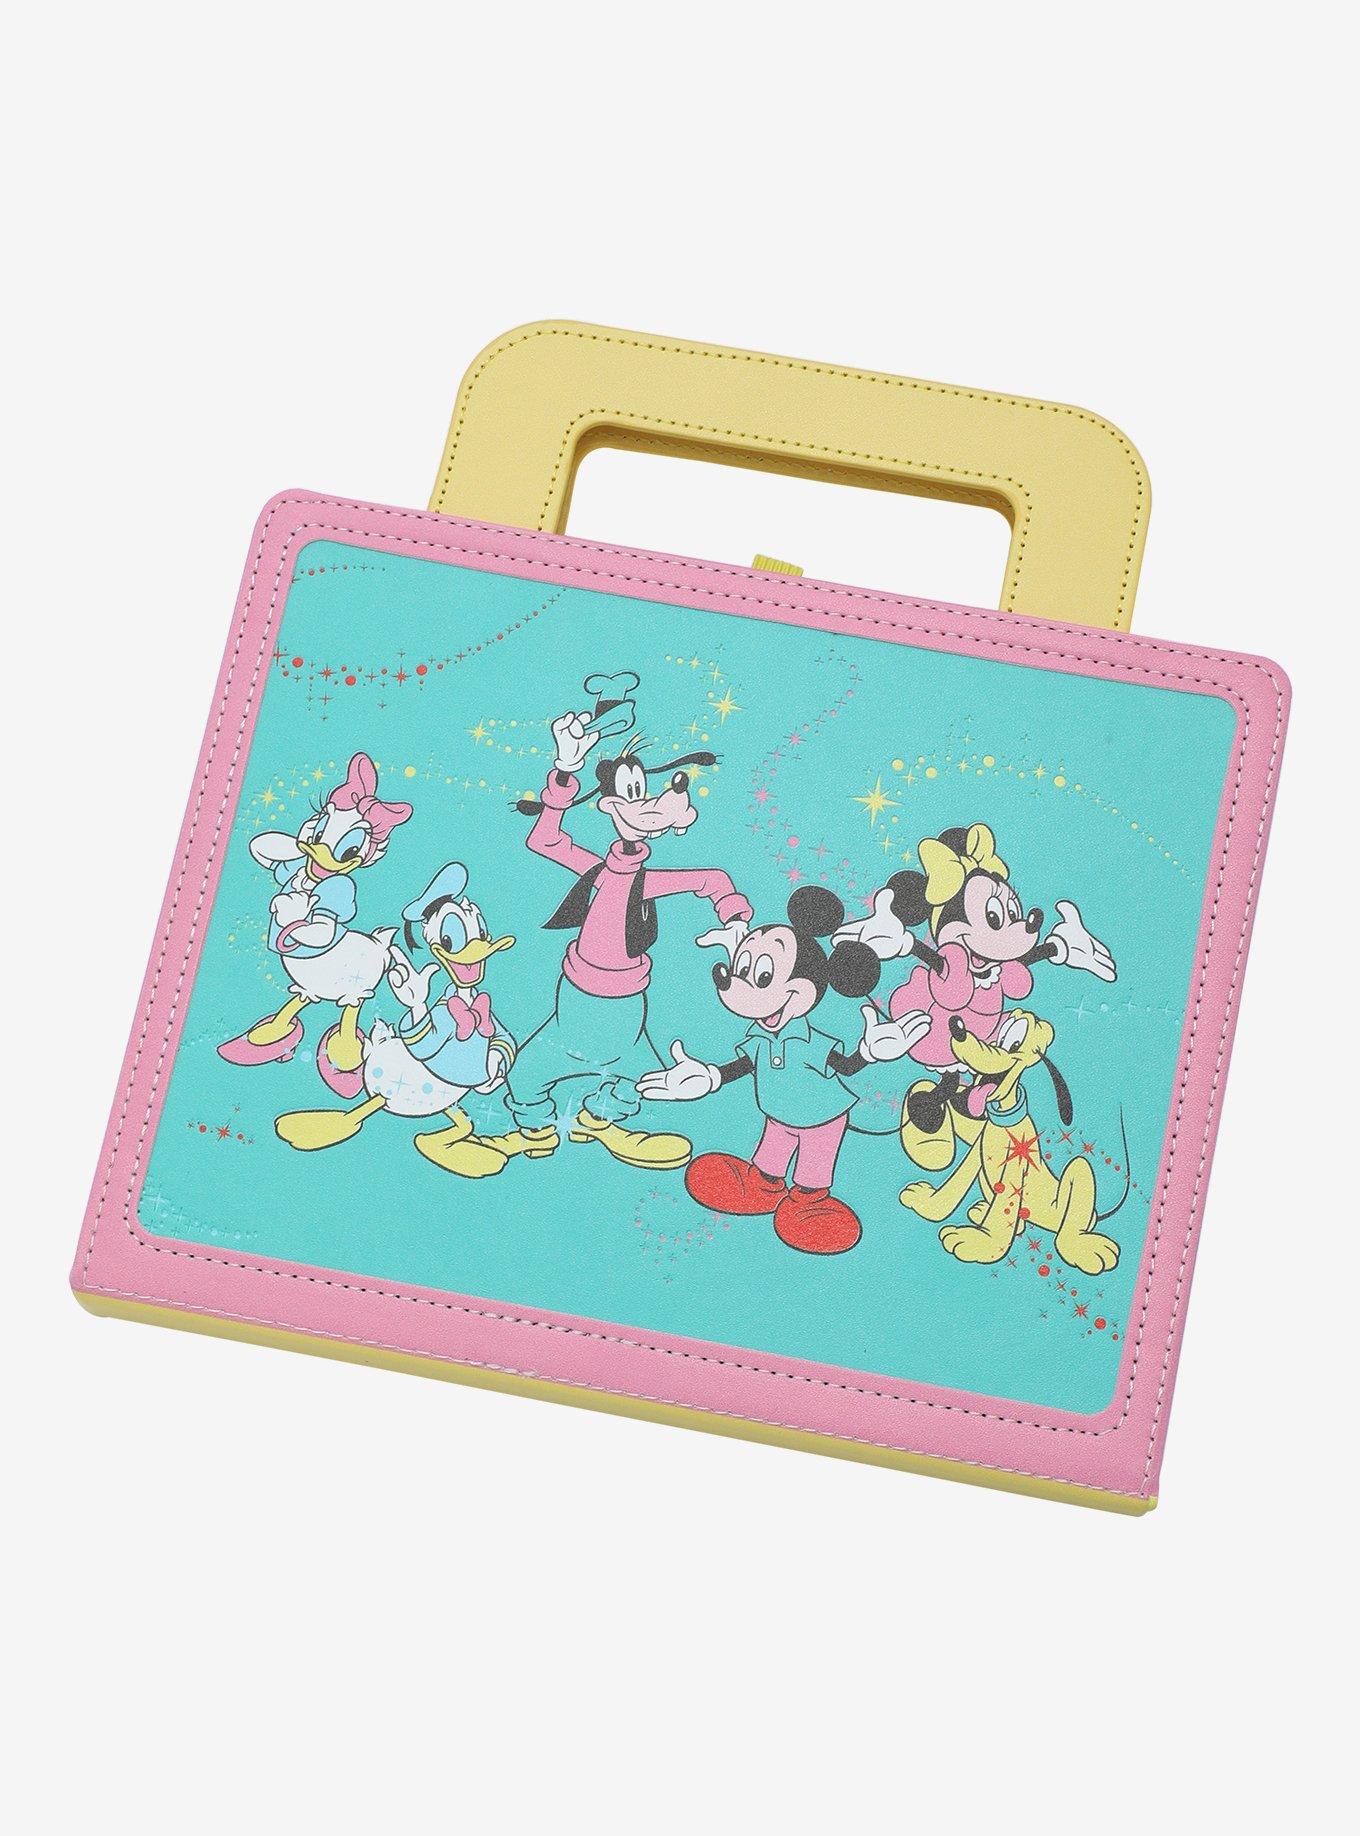 Disney Frozen Mickey Mouse Children's Snack Lunch Box Anime